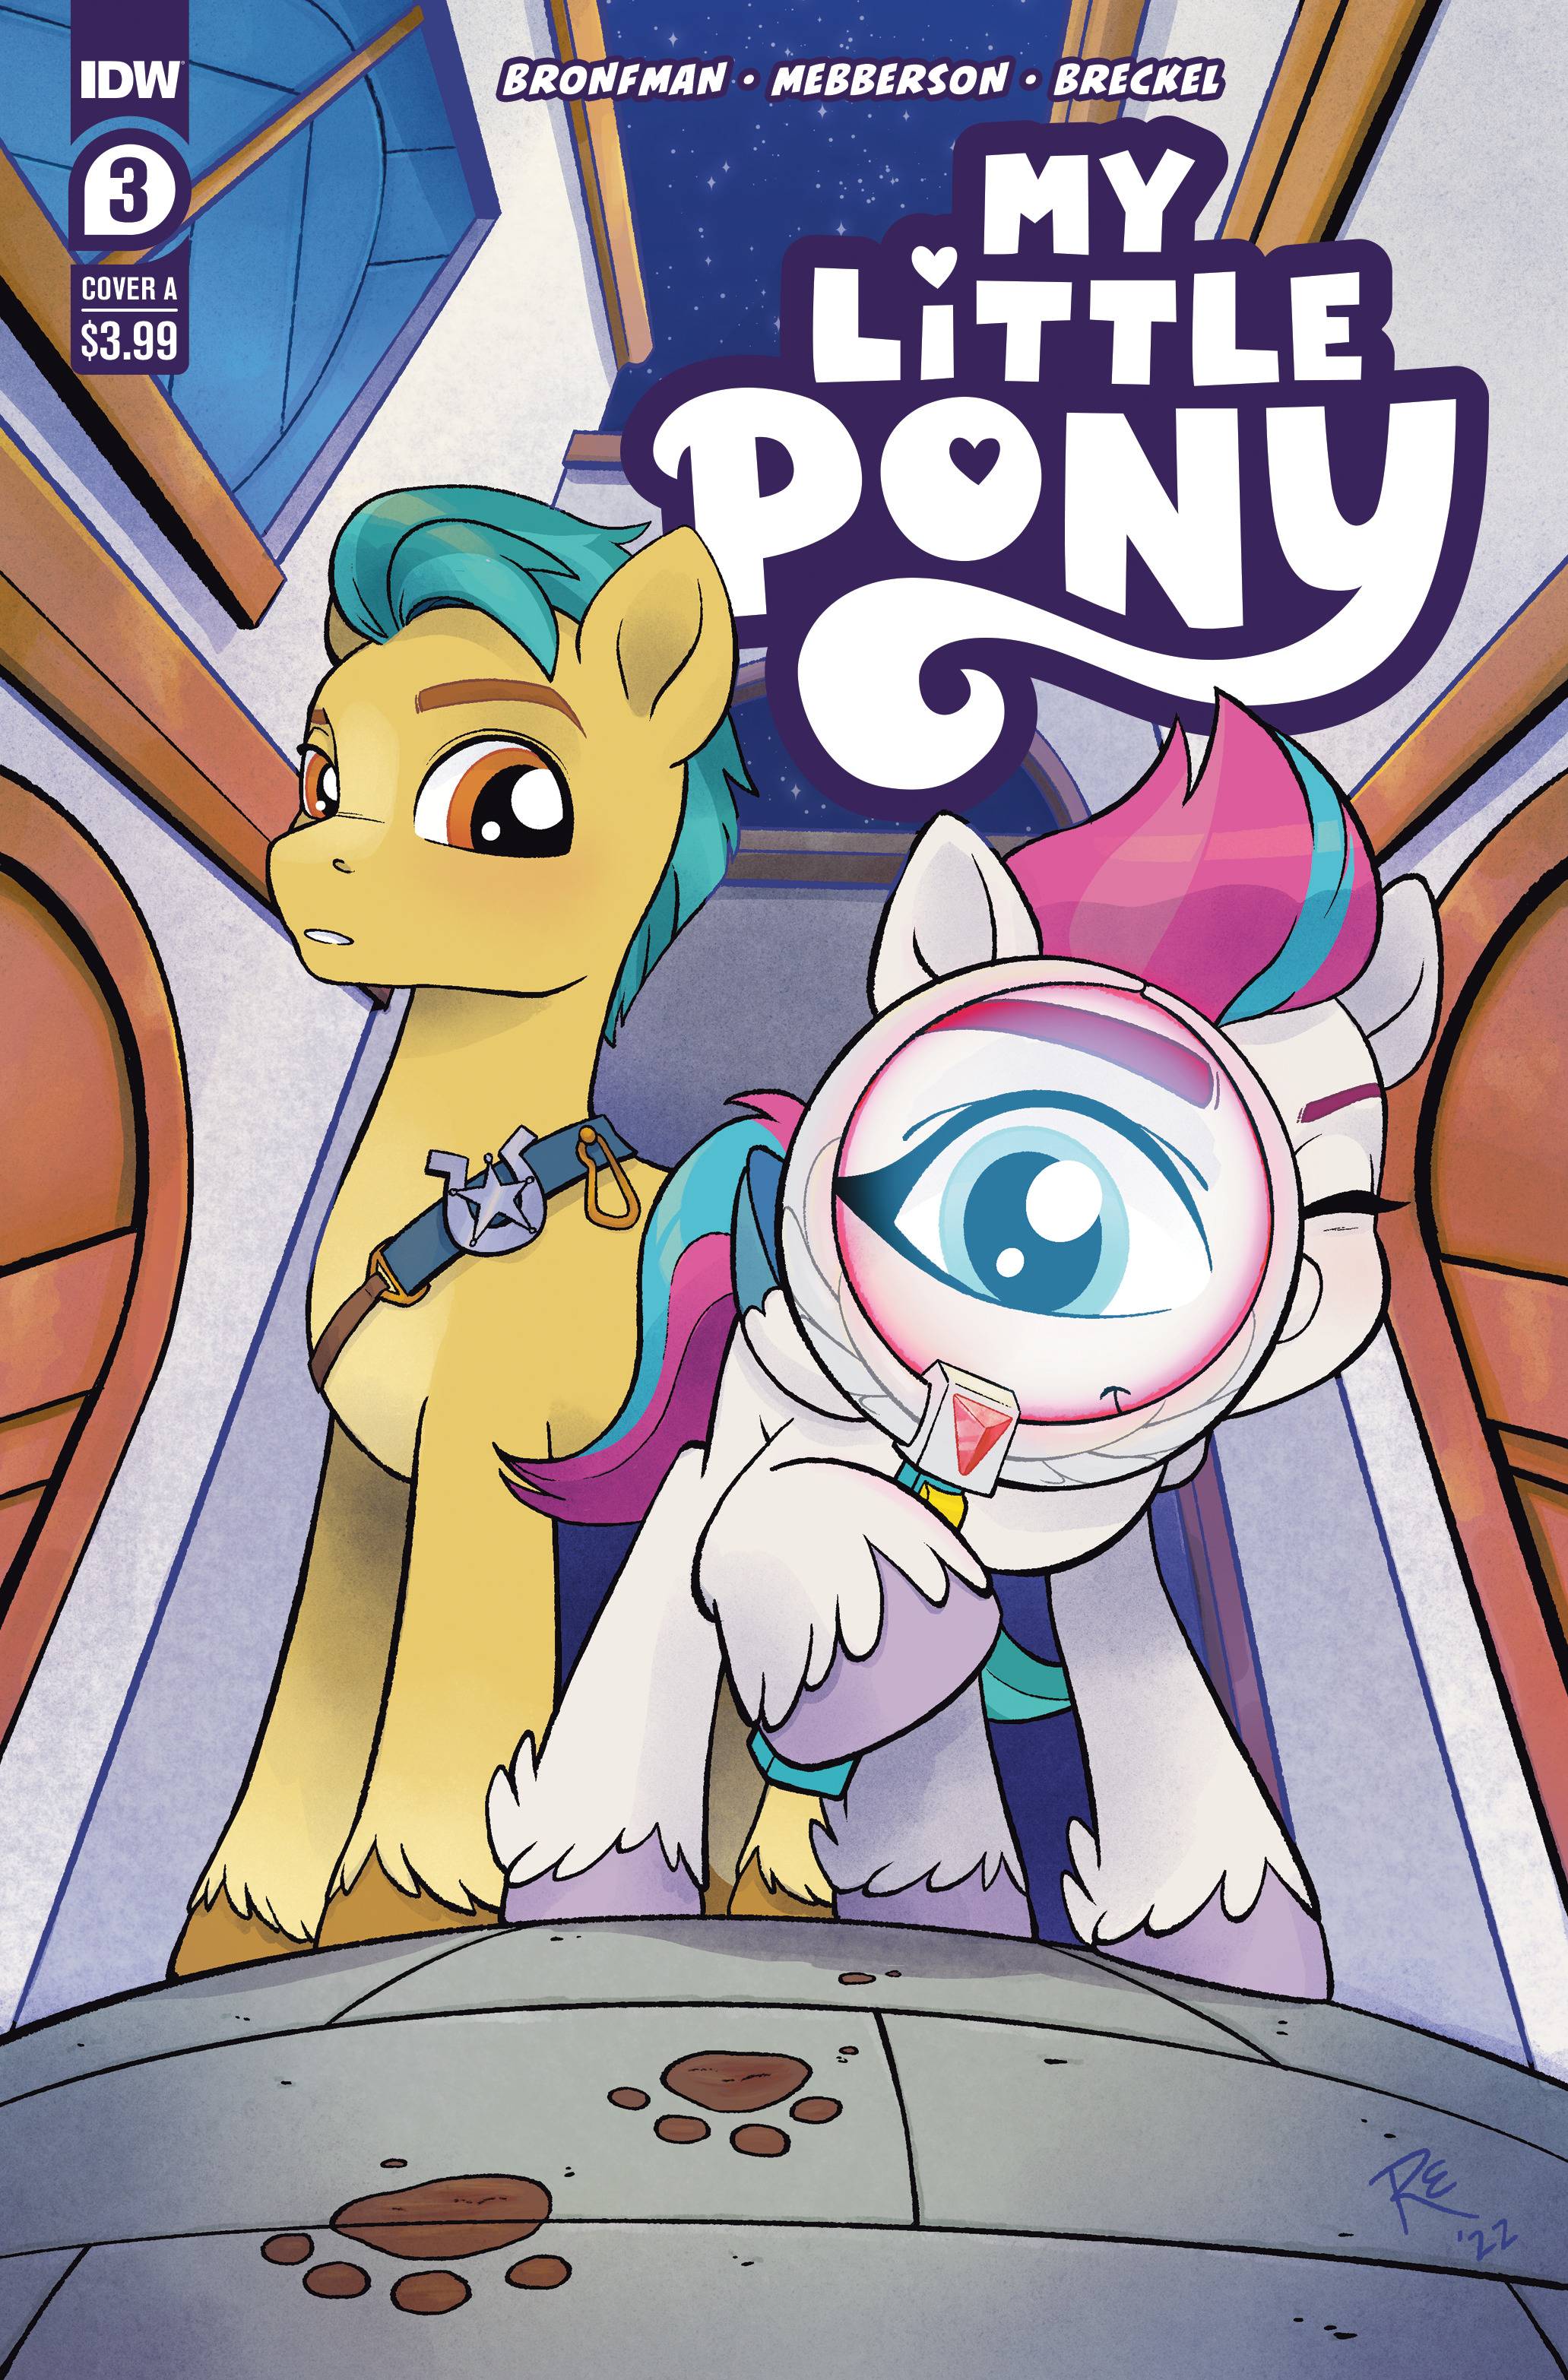 My Little Pony #3 Cover A